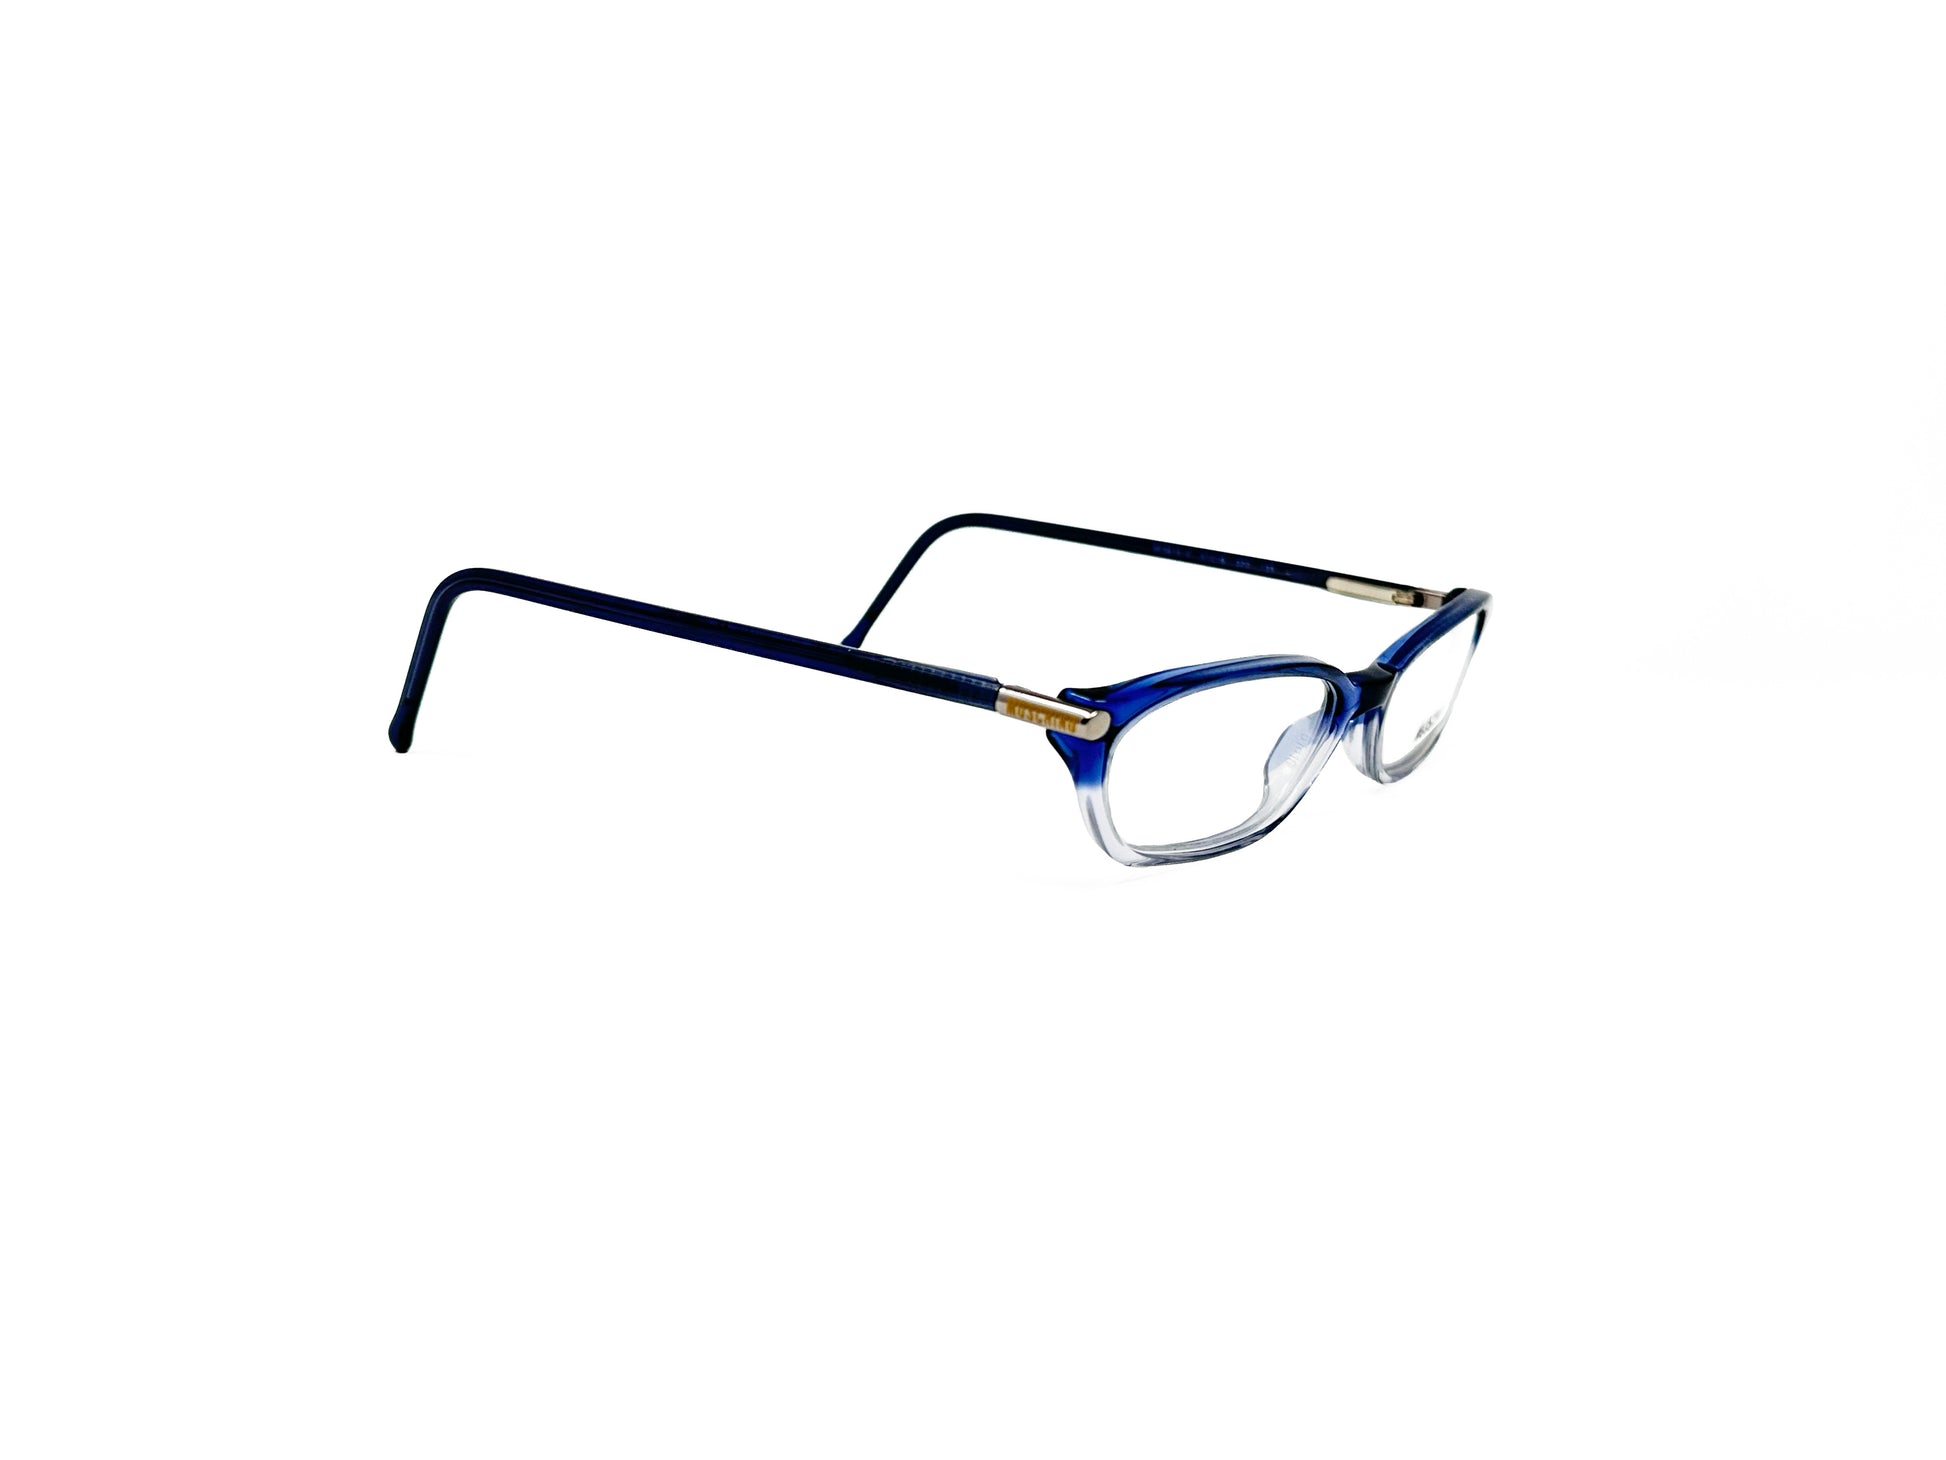 Moschino rectangular acetate optical frame. Model: M3615. Color: 320 Blue to clear gradient. Side view.